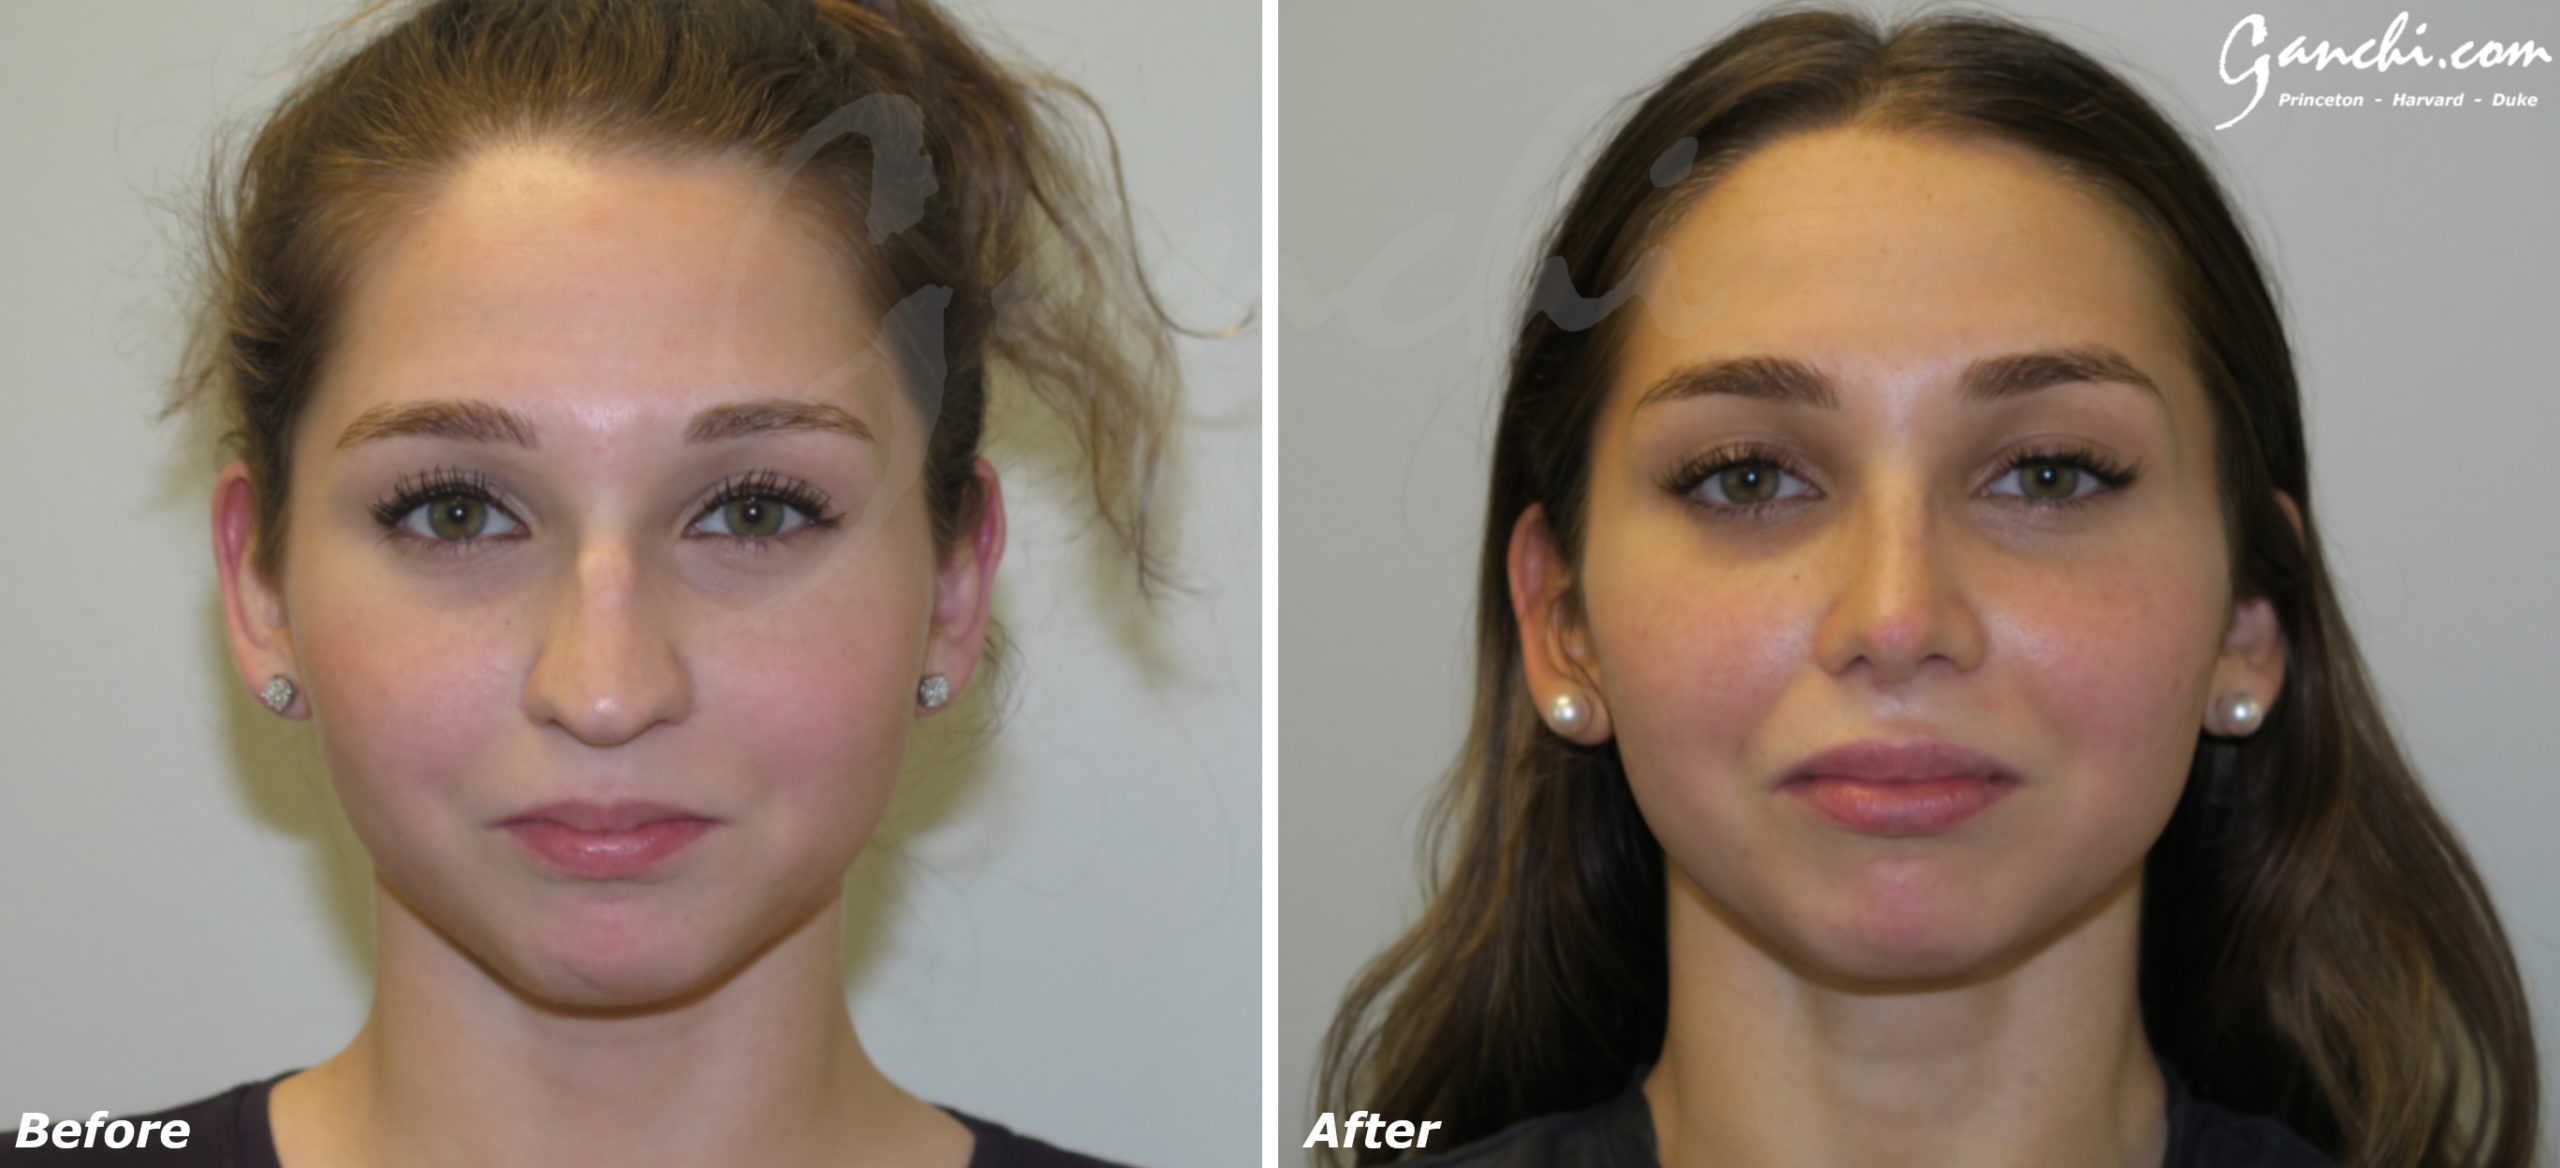 Rhinoplasty Before and After Results